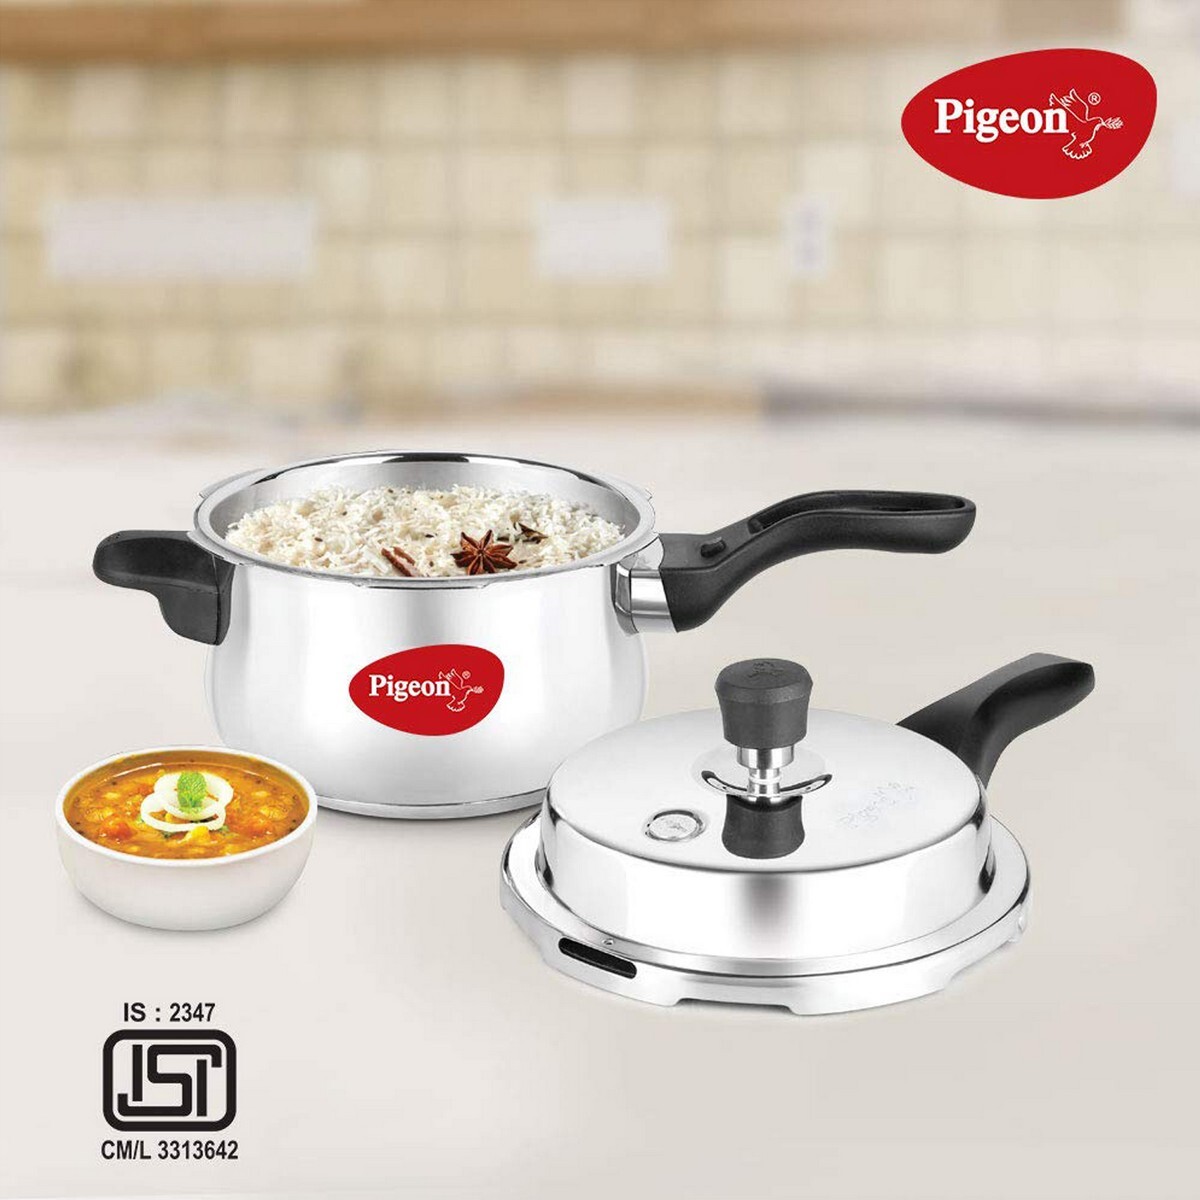 Pigeon Inox Plus Stainless Steel Induction Based Pressure Cooker Outer Lid 3L